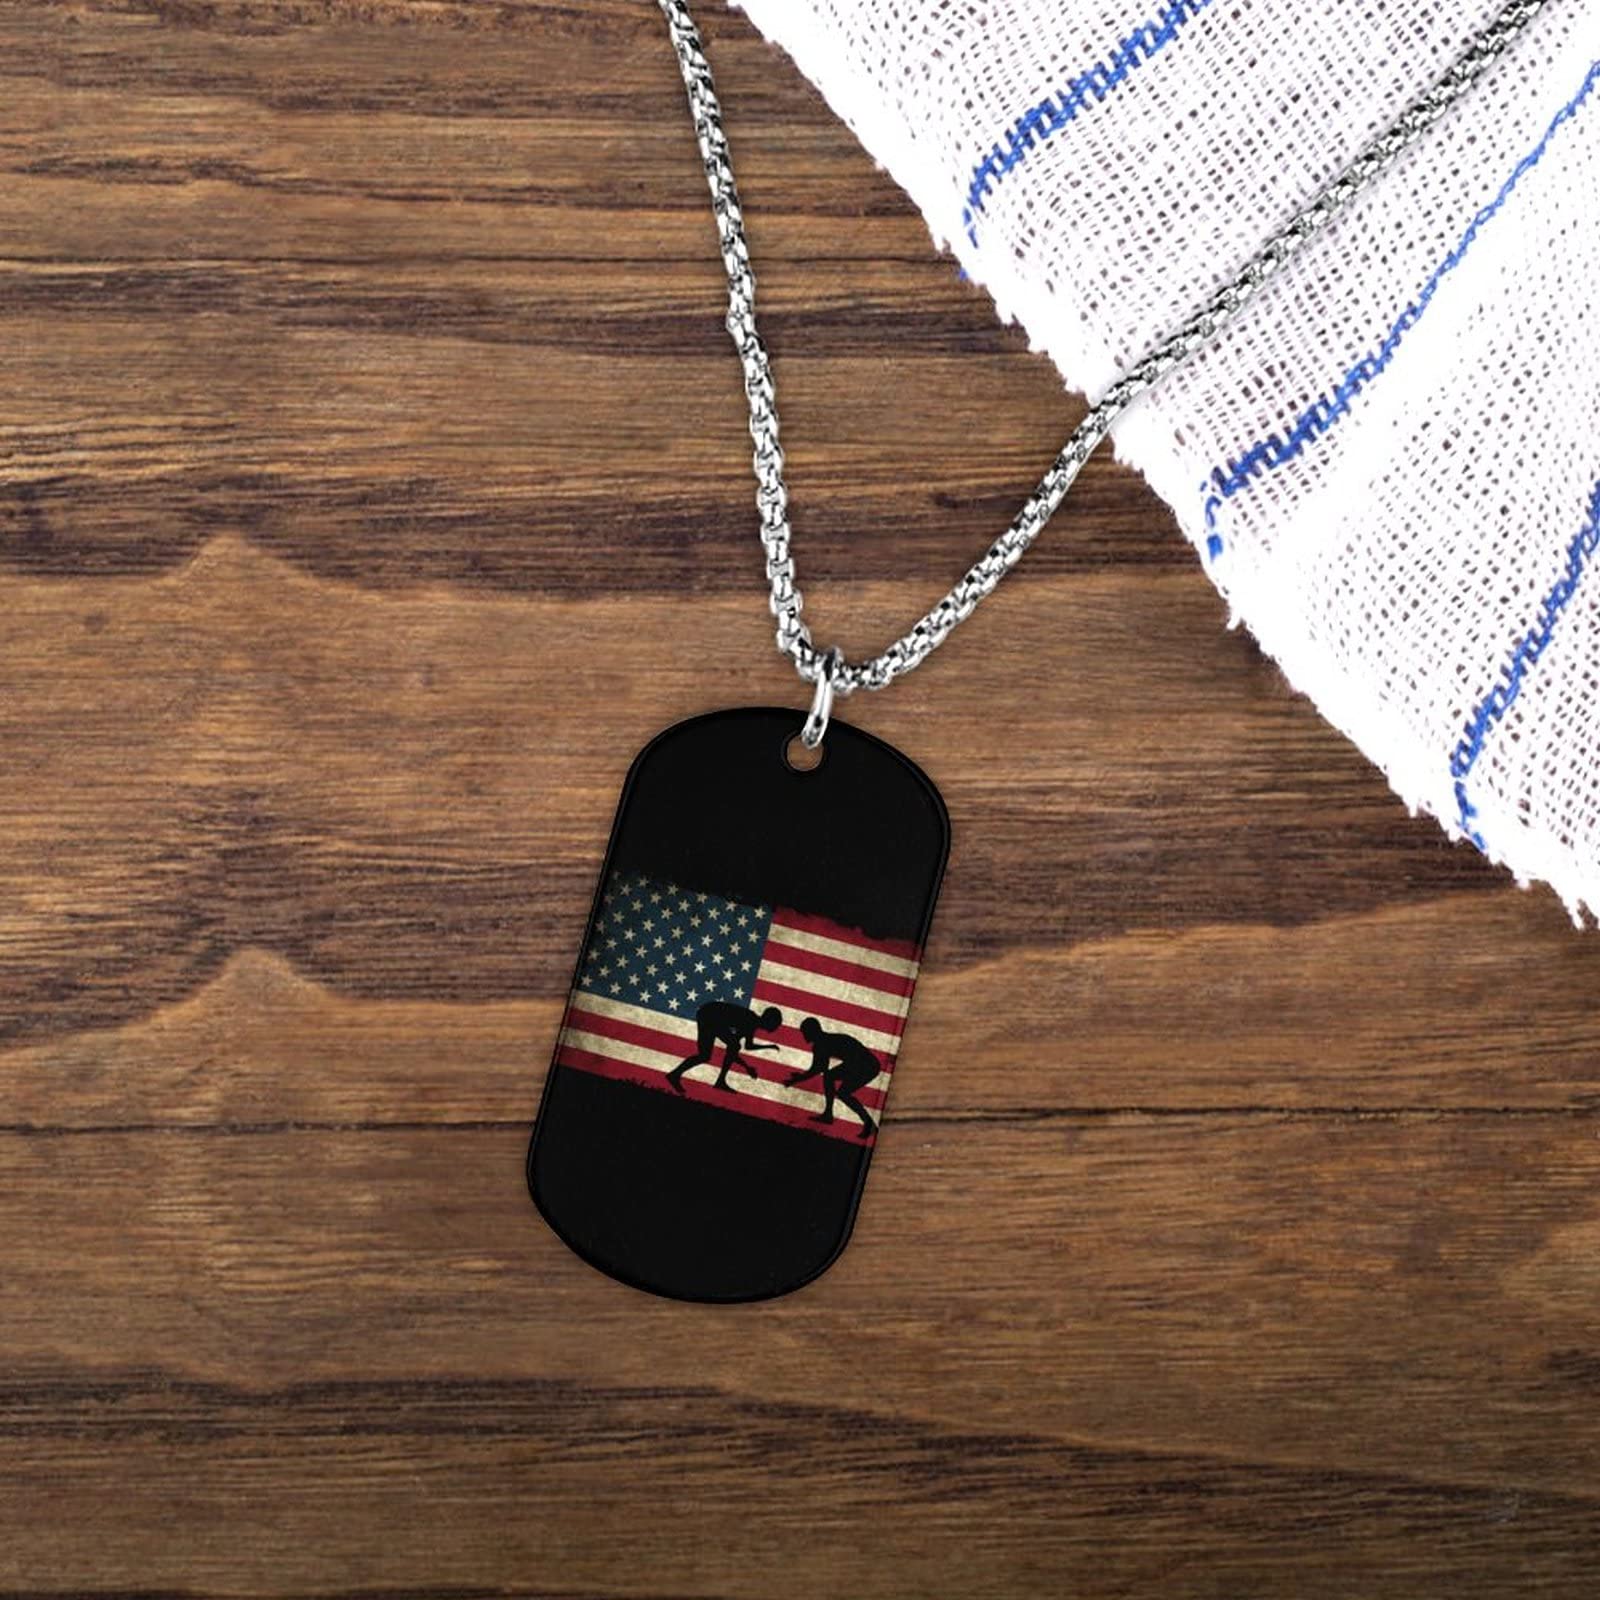 USA Flag Wrestling-1 Necklace Personalized Picture Pendant Necklace Jewelry for Men Women Gift